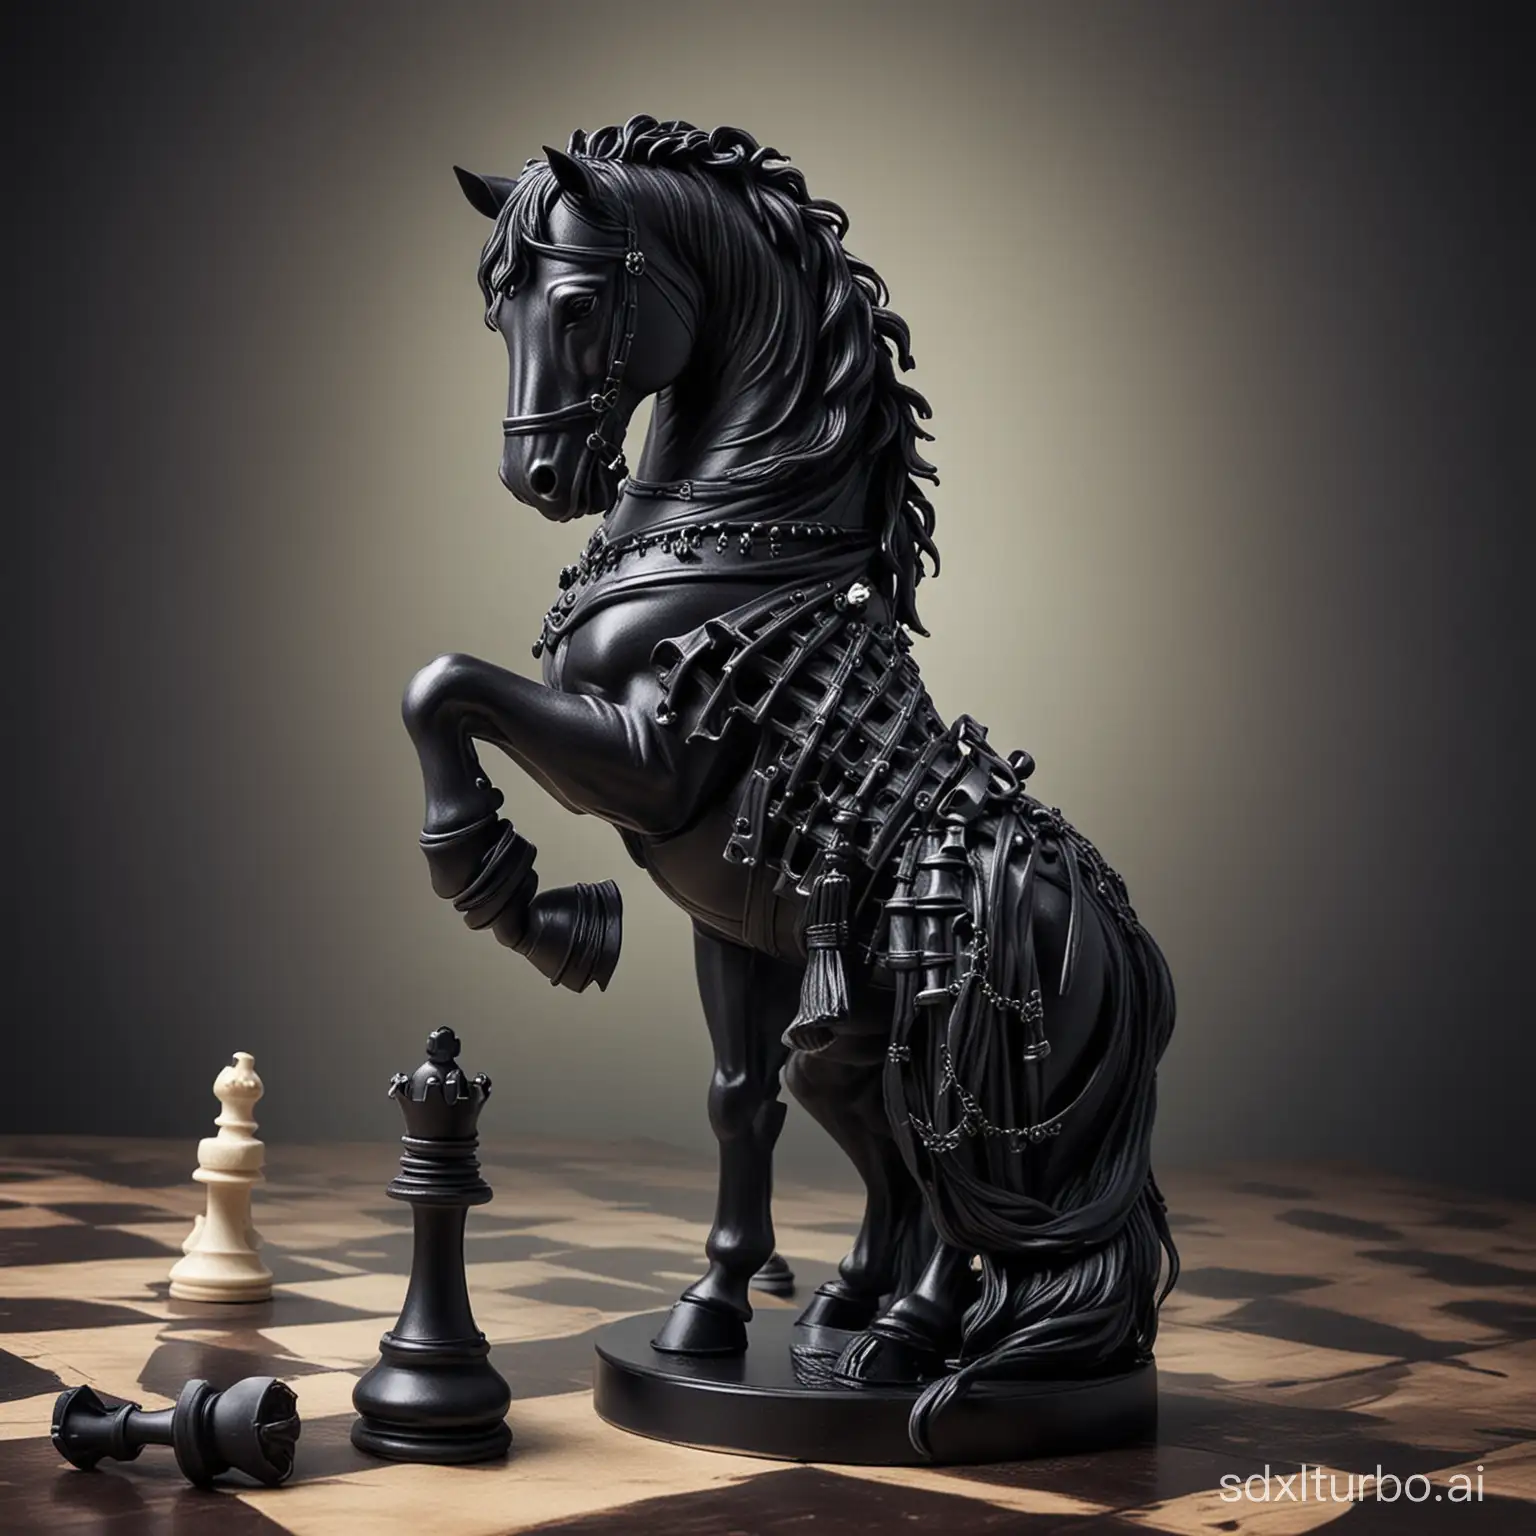 A horse chess piece wearing dark gothic emo edgy clothing